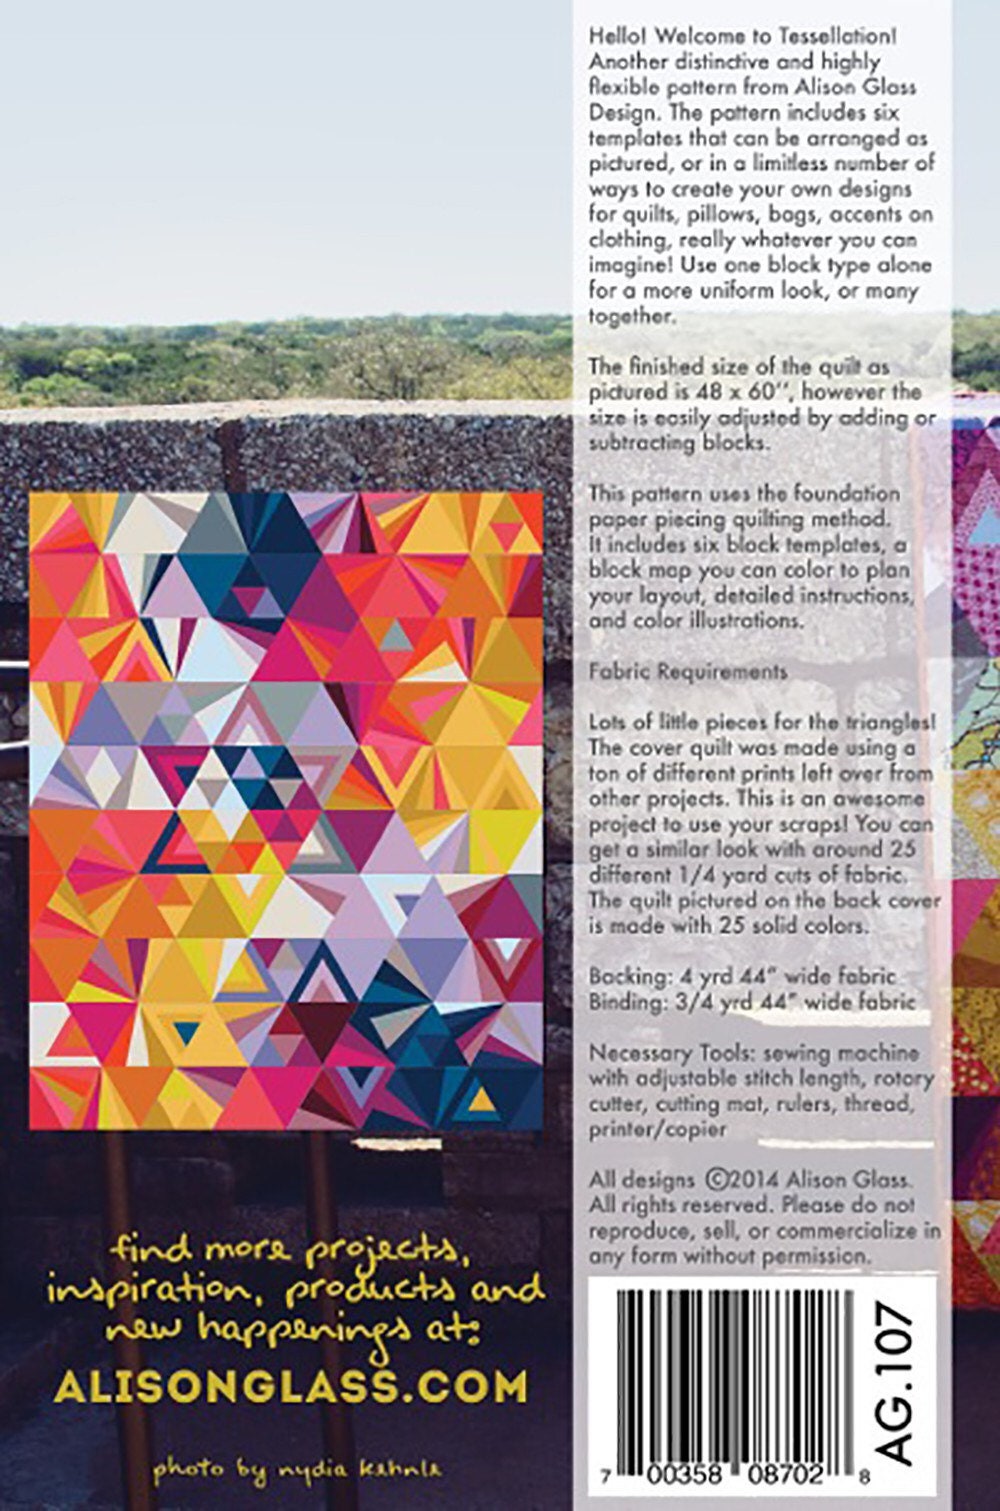 Tessellation Quilt Pattern - Alison Glass - Nydia Kehnle - Foundation Paper Piecing